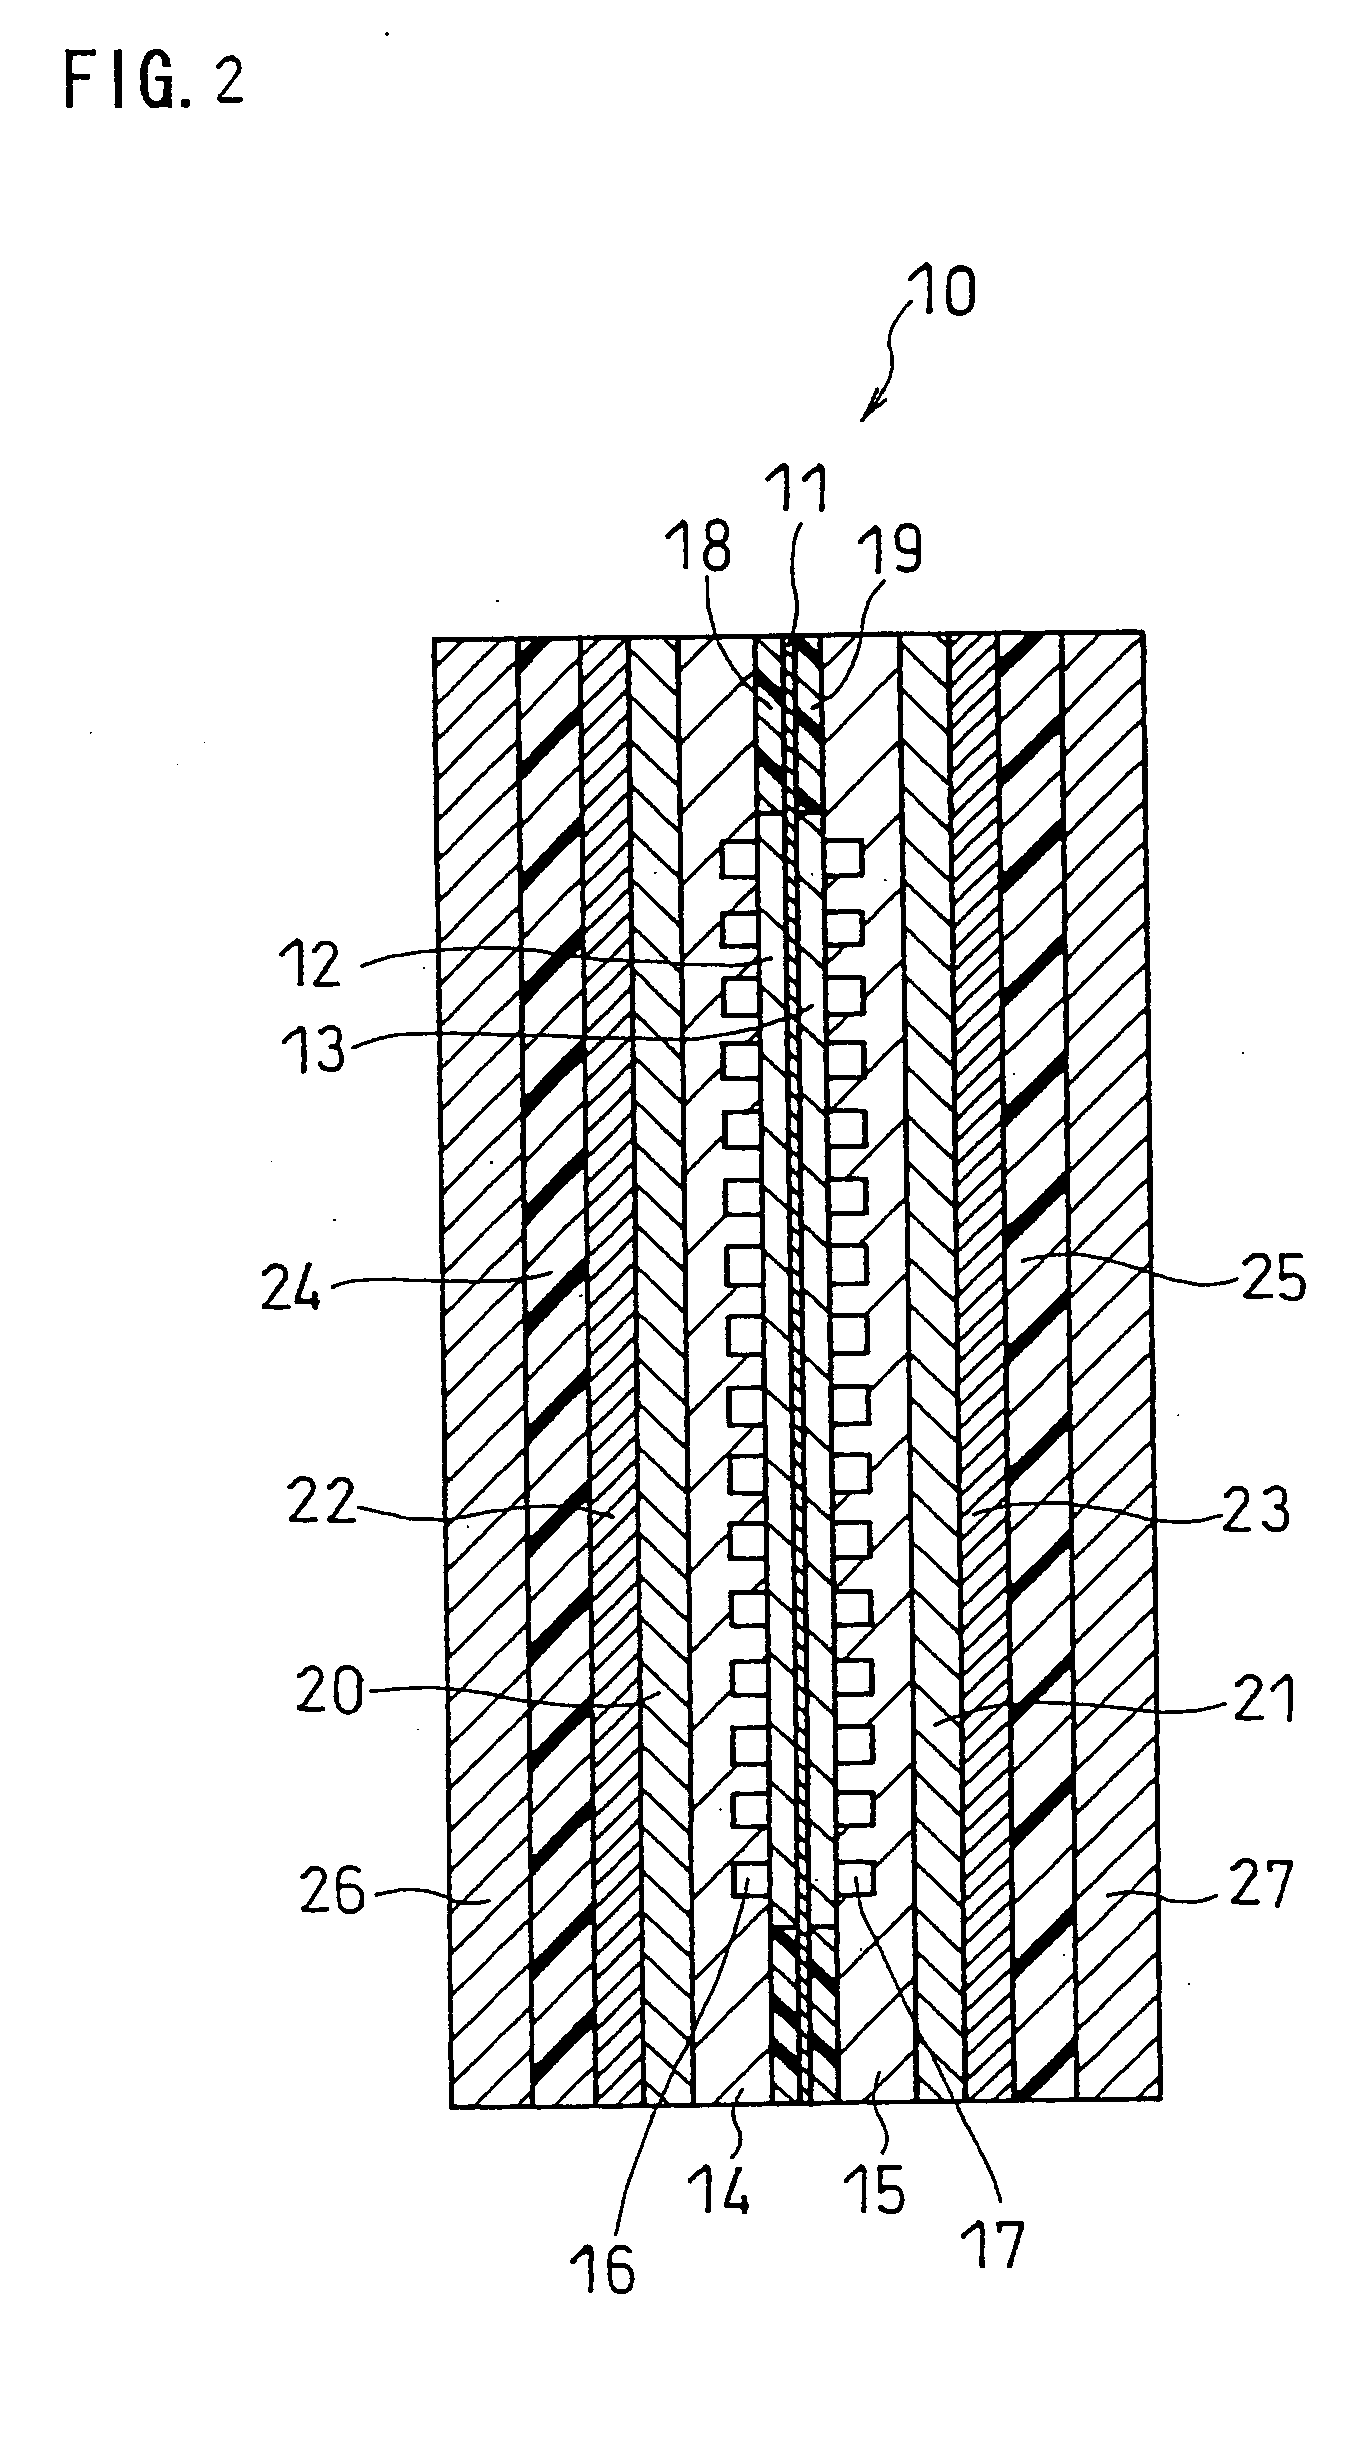 Direct oxidation fuel cell and method for operating direct oxidation fuel cell system